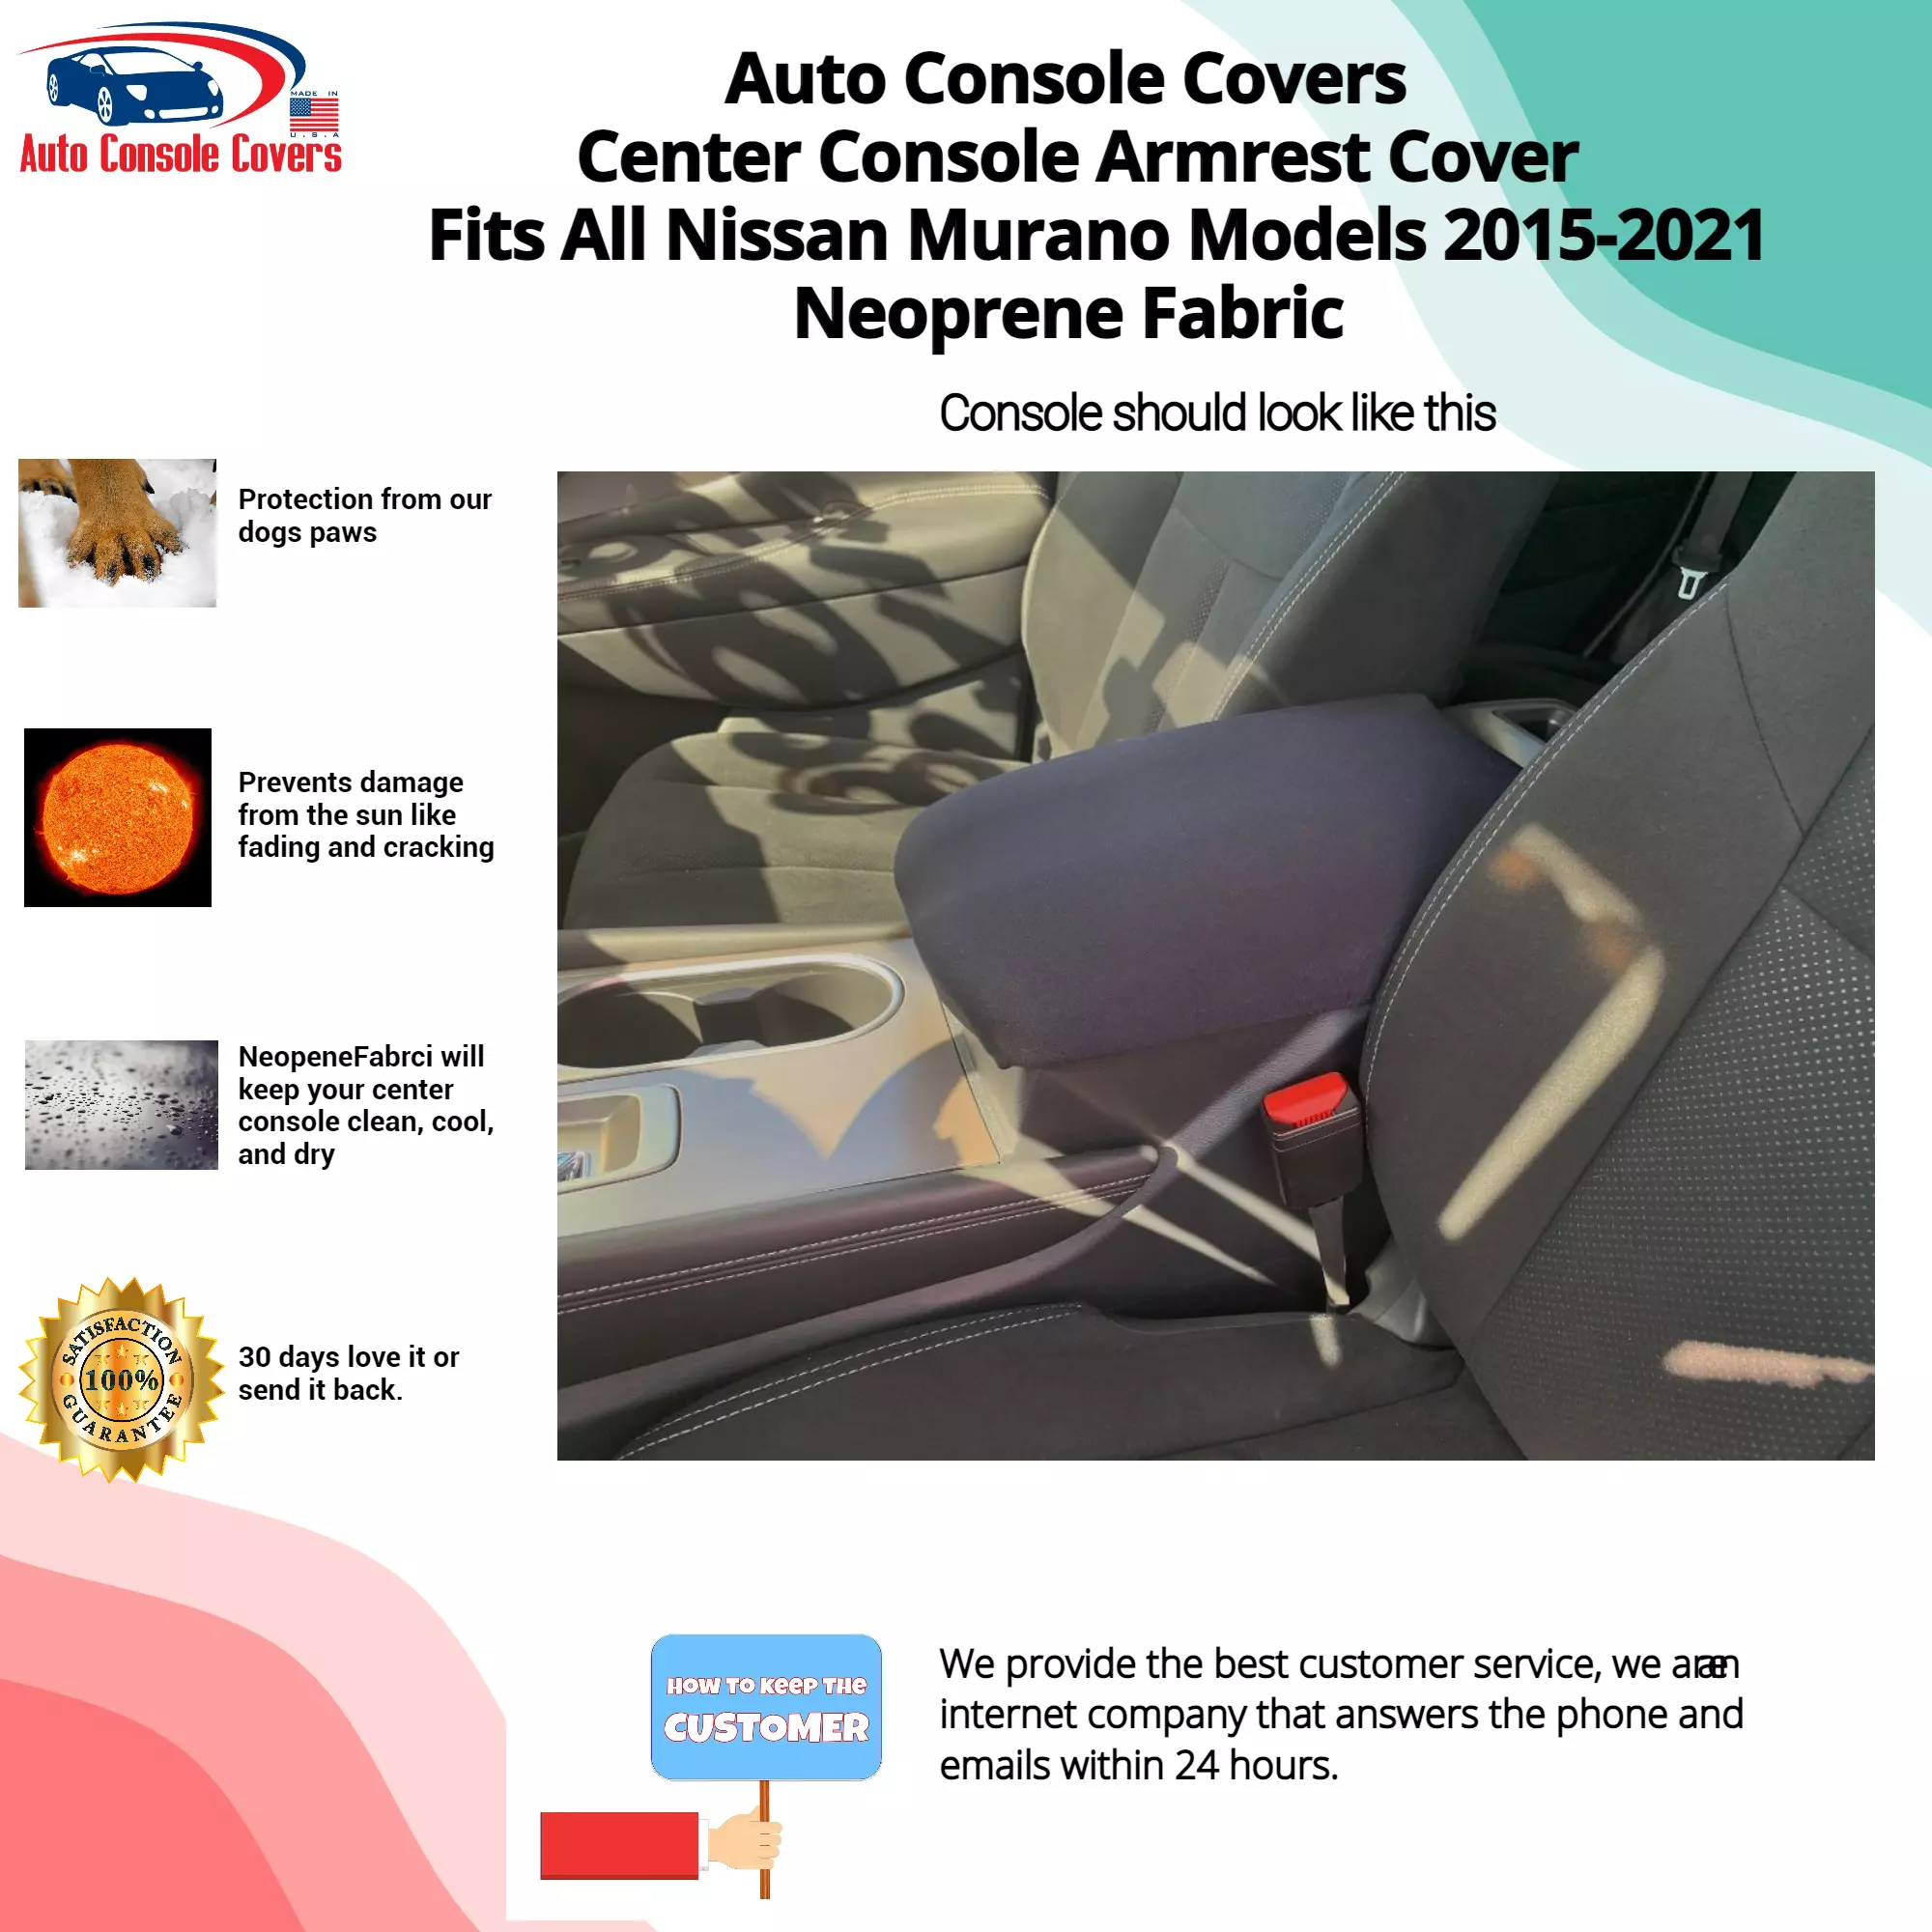 Buy Neoprene Center Console Armrest Cover Fits the Nissan Murano 2015-2021